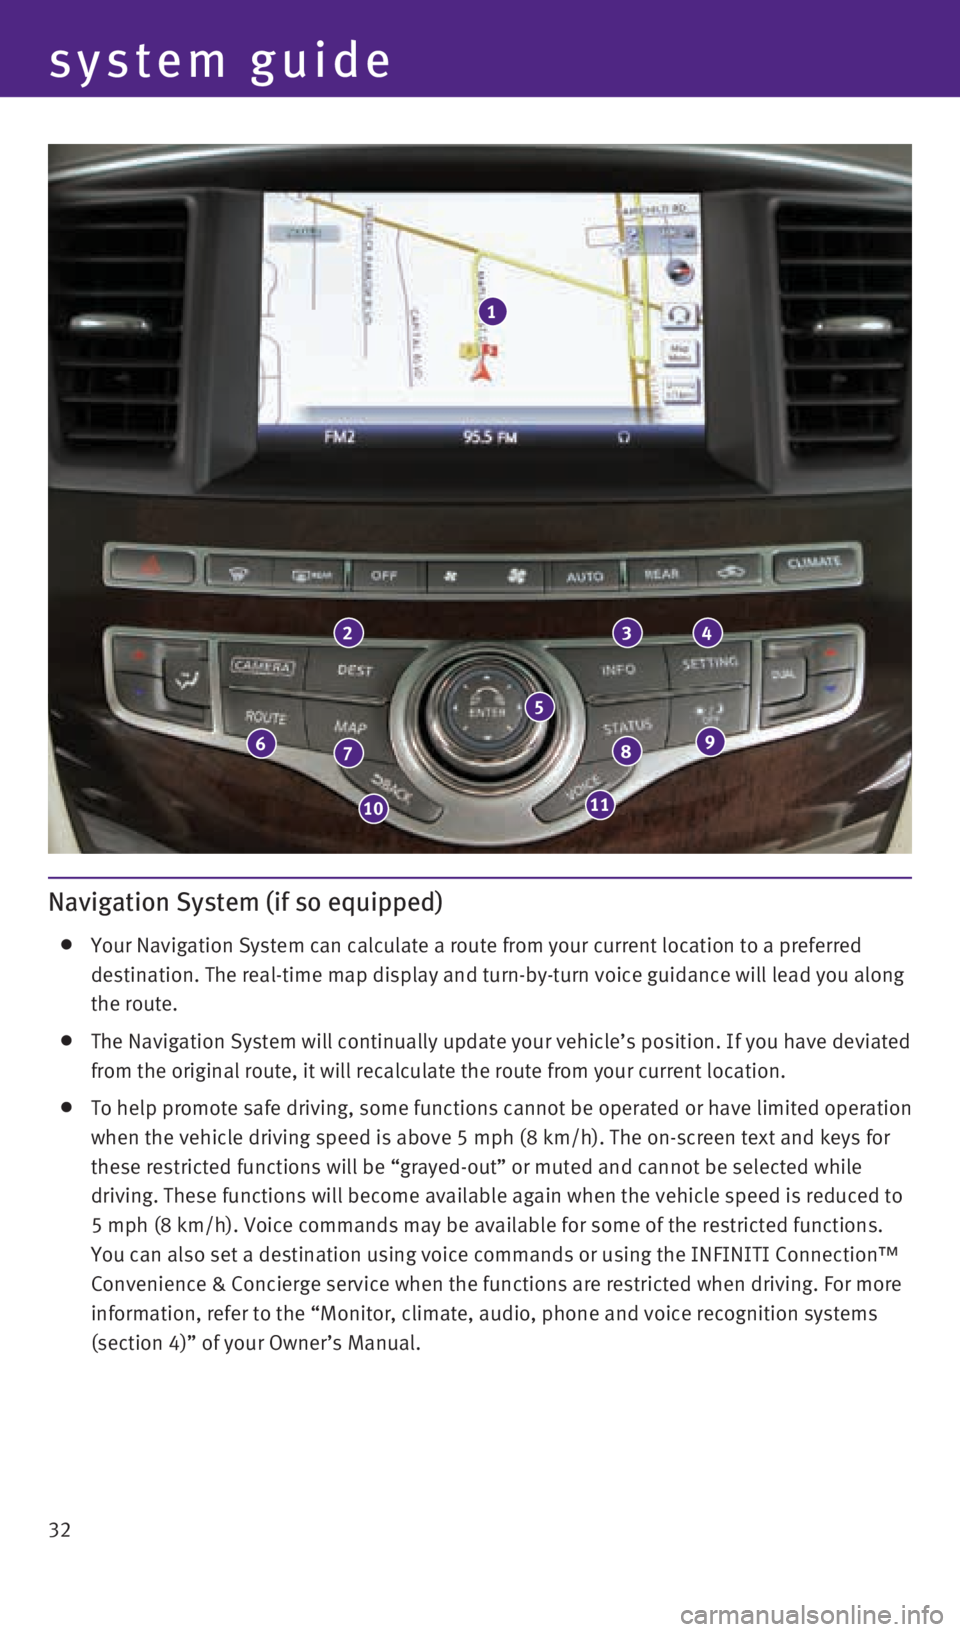 INFINITI QX60 2015  Quick Reference Guide 32
system guide
Navigation System (if so equipped)
   Your Navigation System can calculate a route from your current location \
to a preferred 
destination. The real-time map display and turn-by-turn 